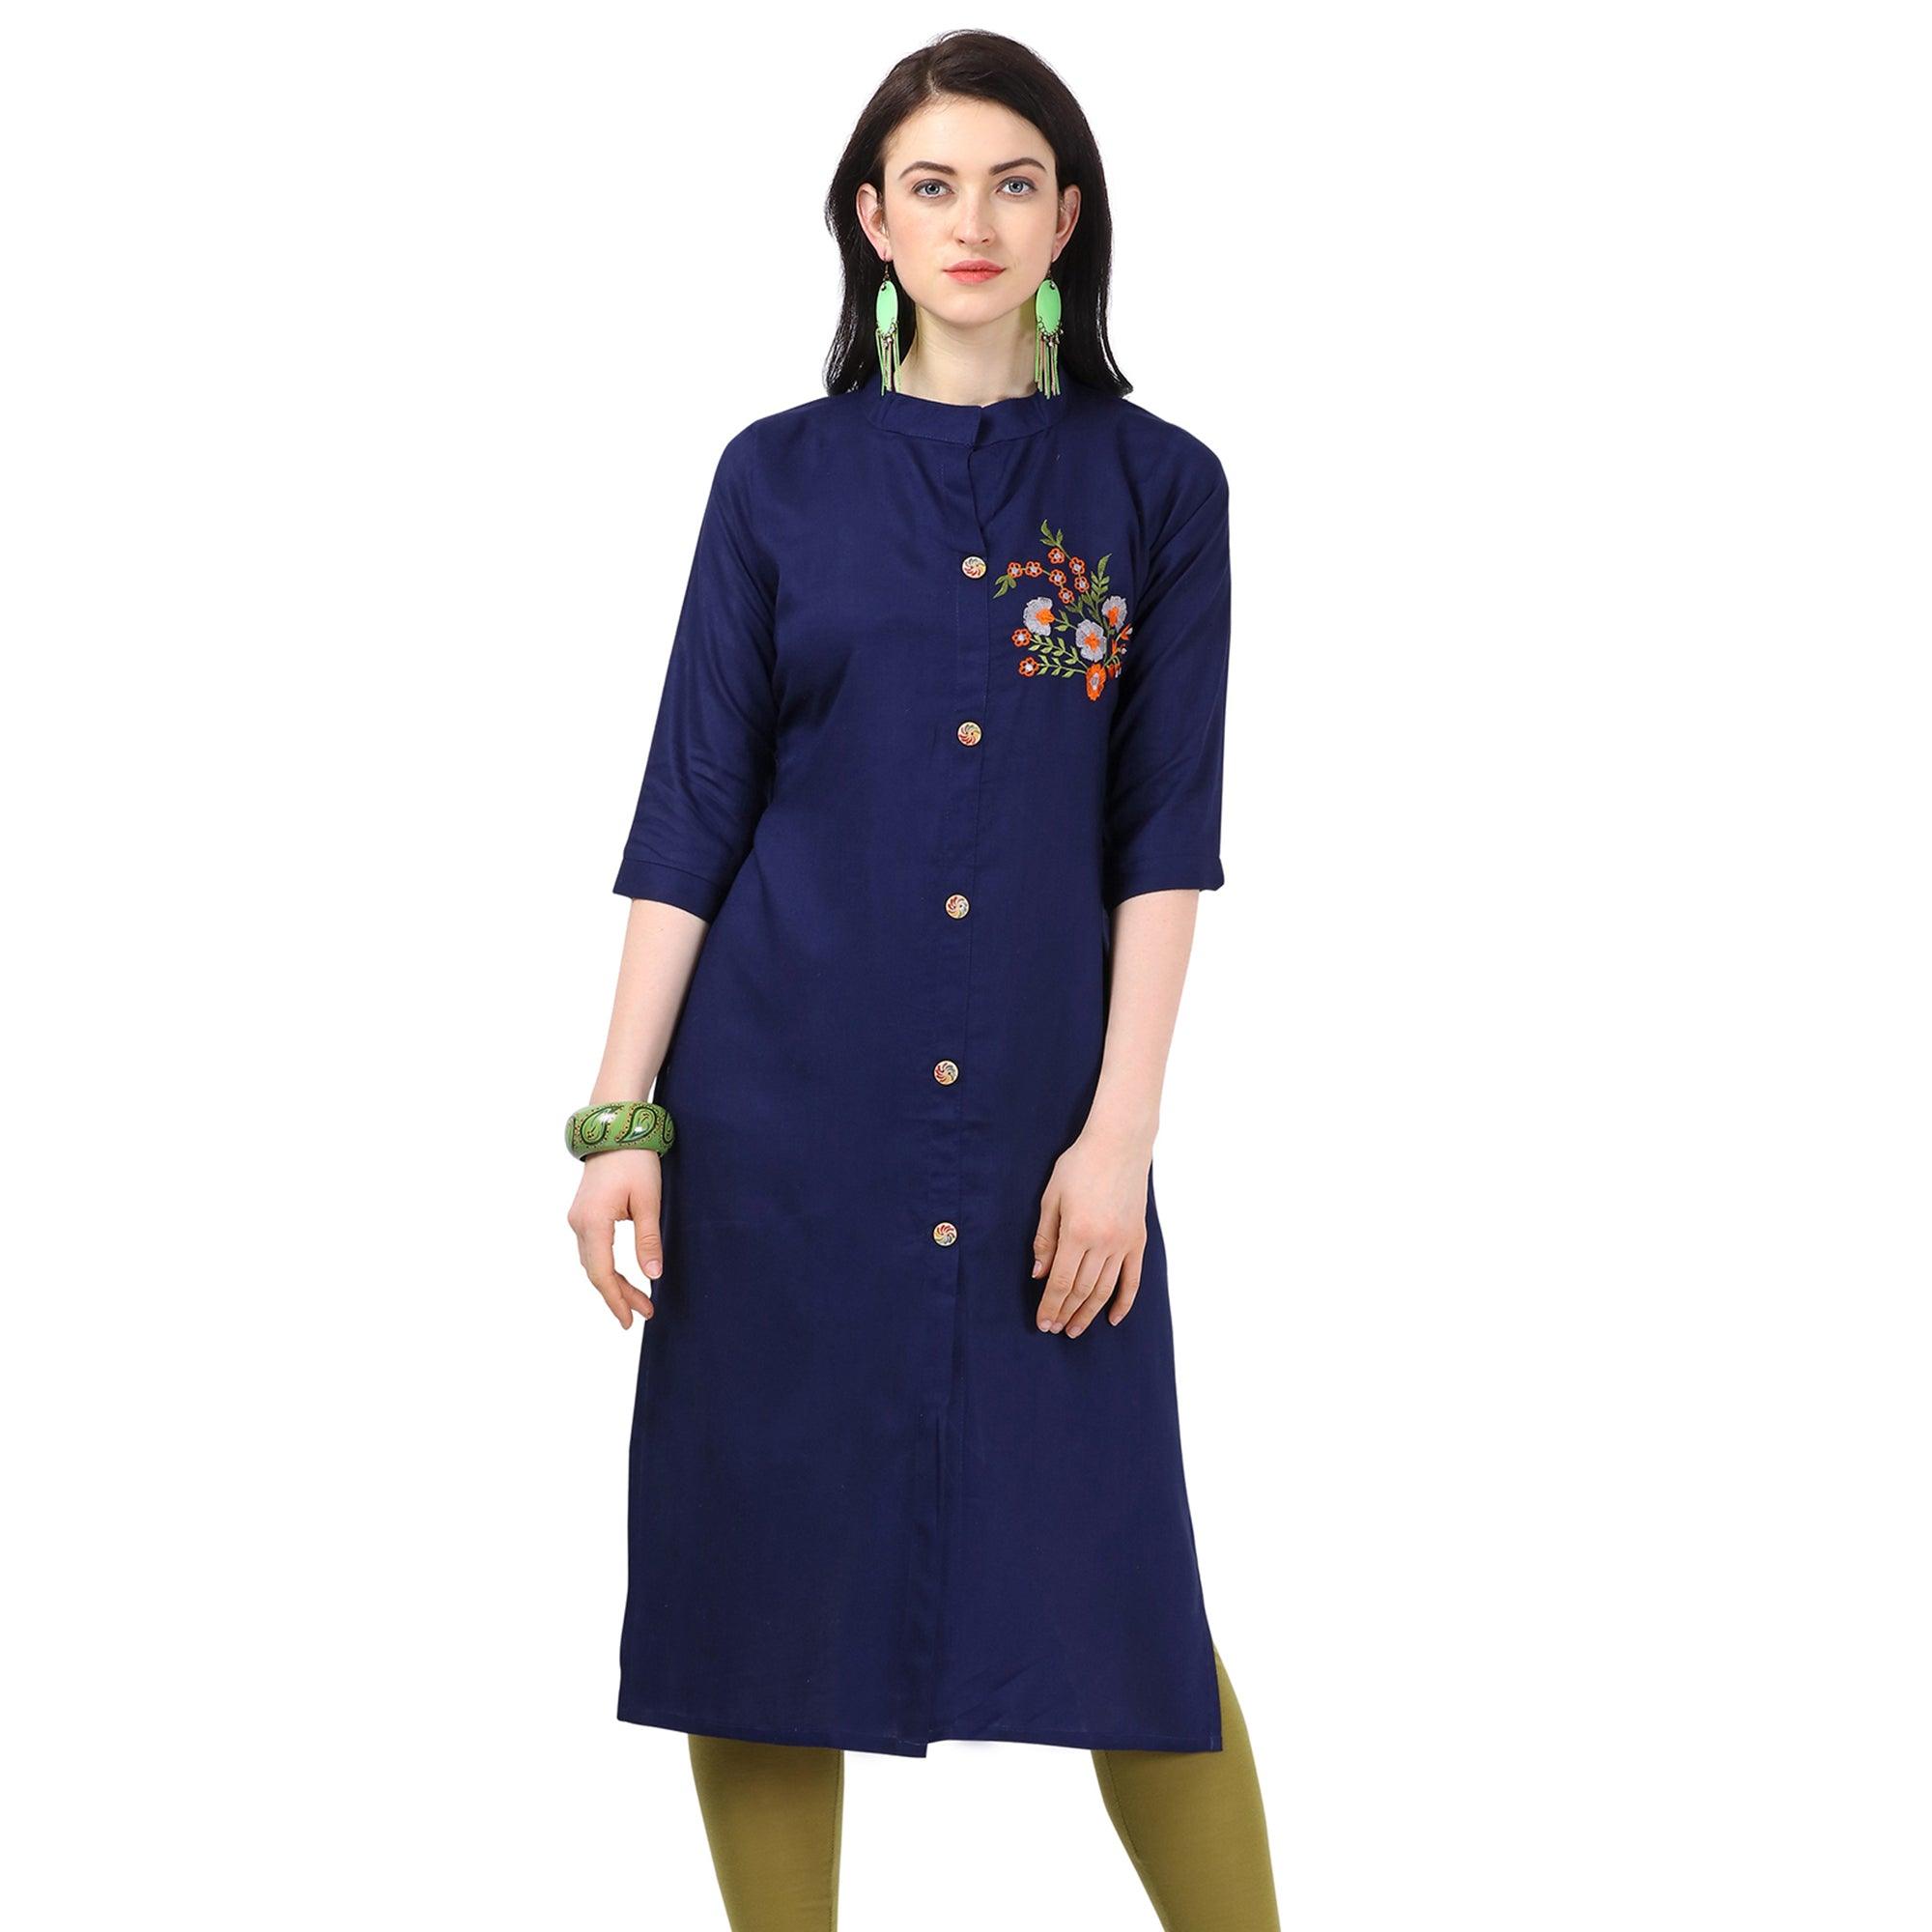 Engrossing Navy Blue Colored Partywear Embroidered Rayon Kurti - Peachmode